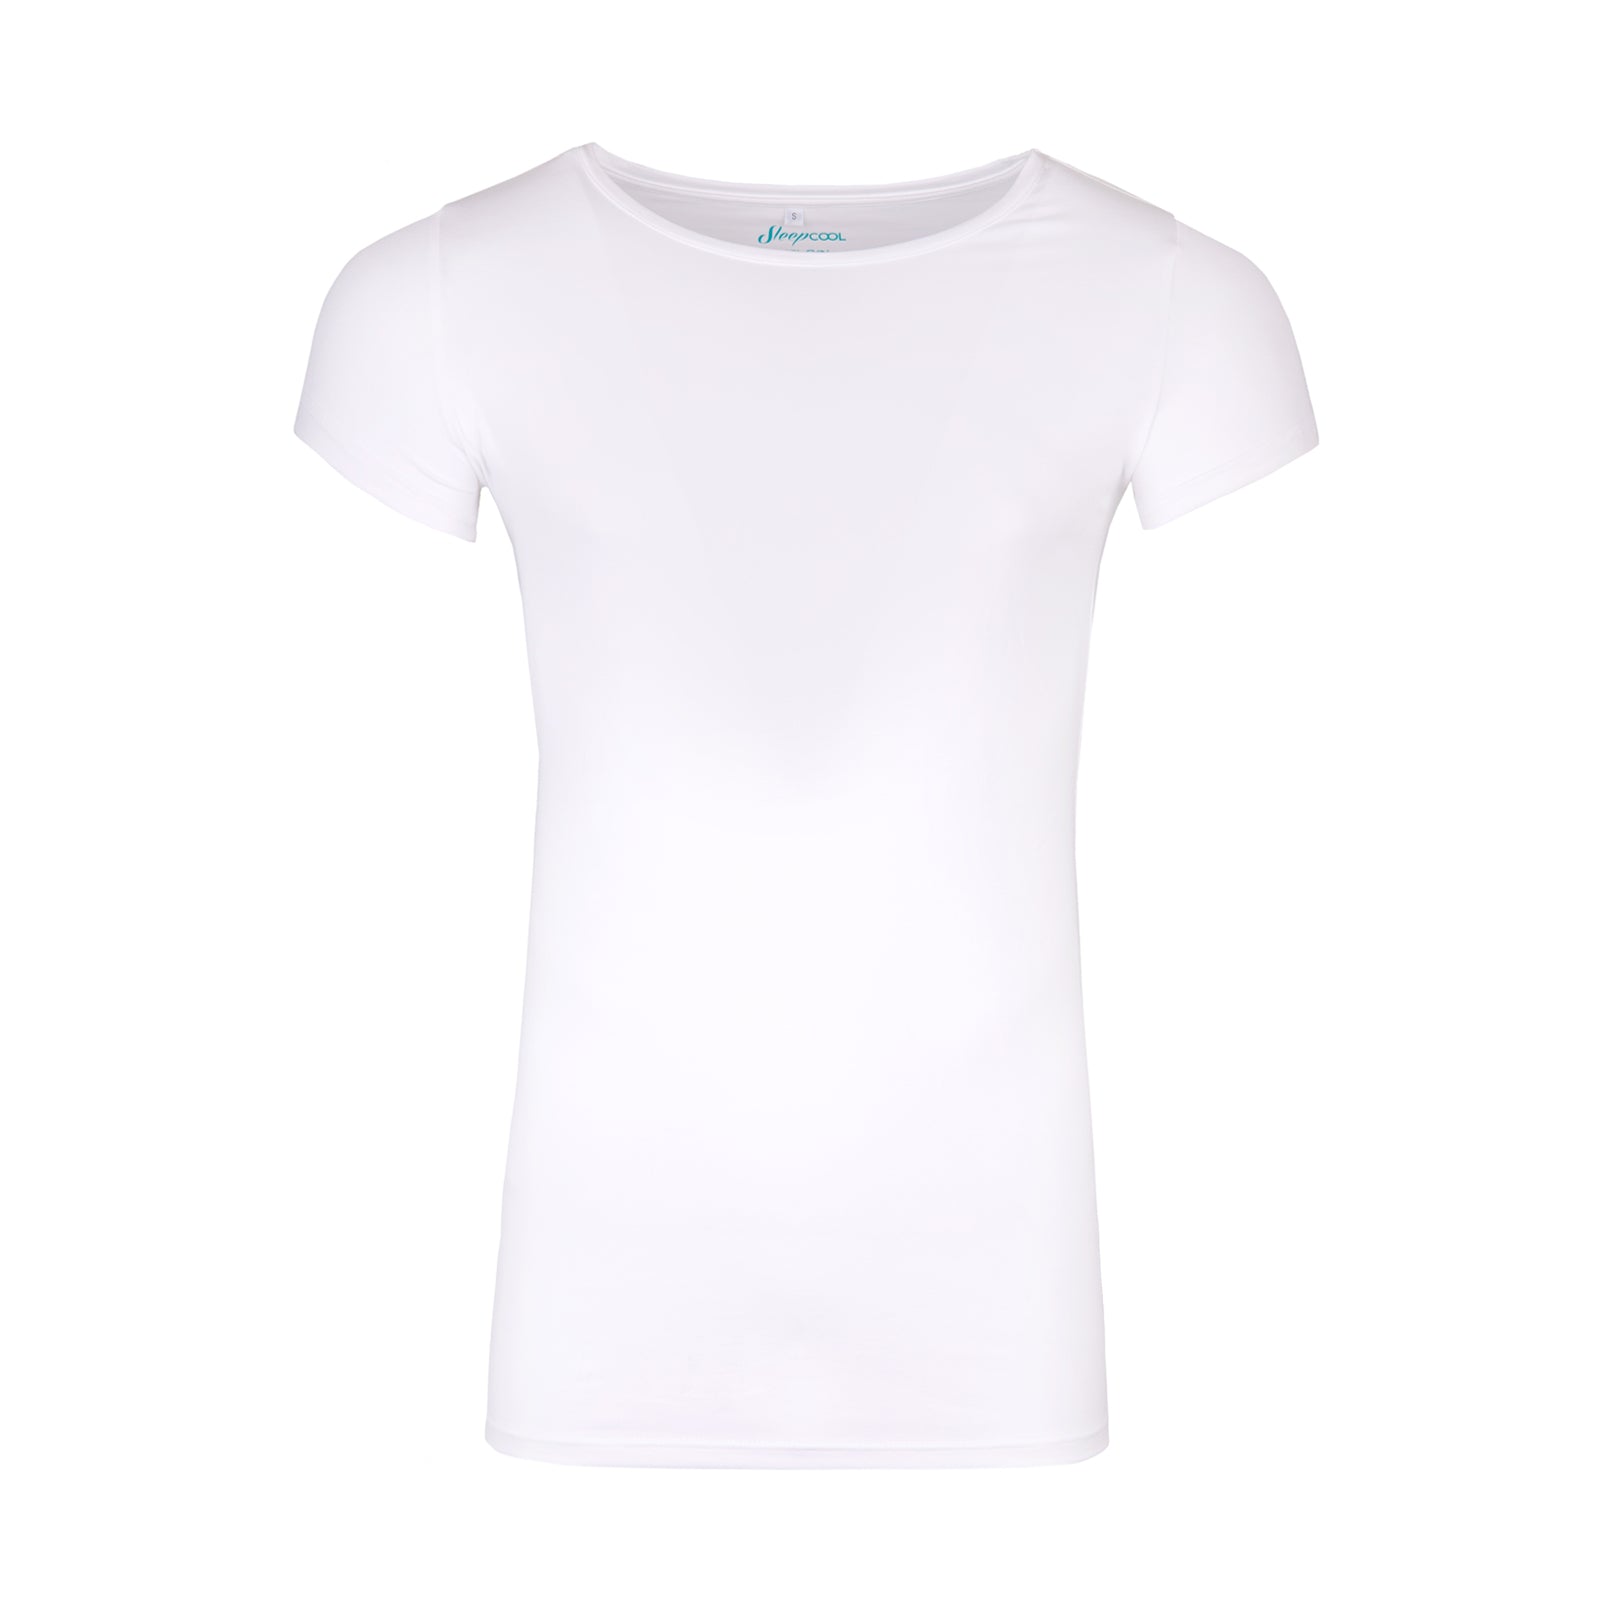 Functional T-shirt COOL.SKIN, ladies, pleasant freshness due to cooling effect, the SleepCOOL feeling to take away